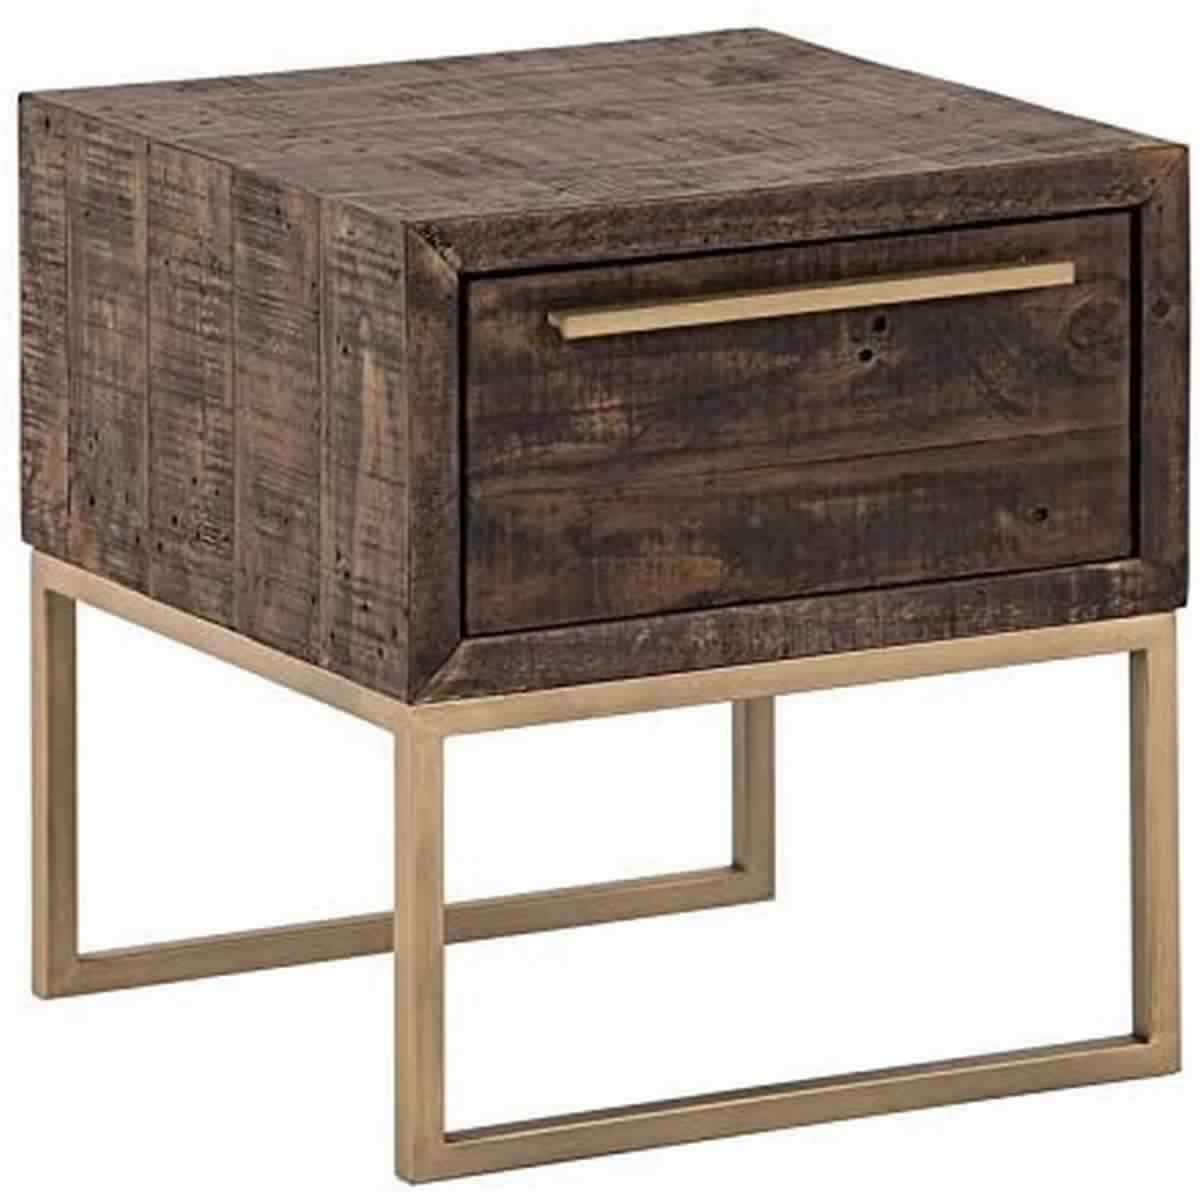 Wooden Lamp Table With 1 Storage Drawer And Metal Base, Brown And Gold- Saltoro Sherpi